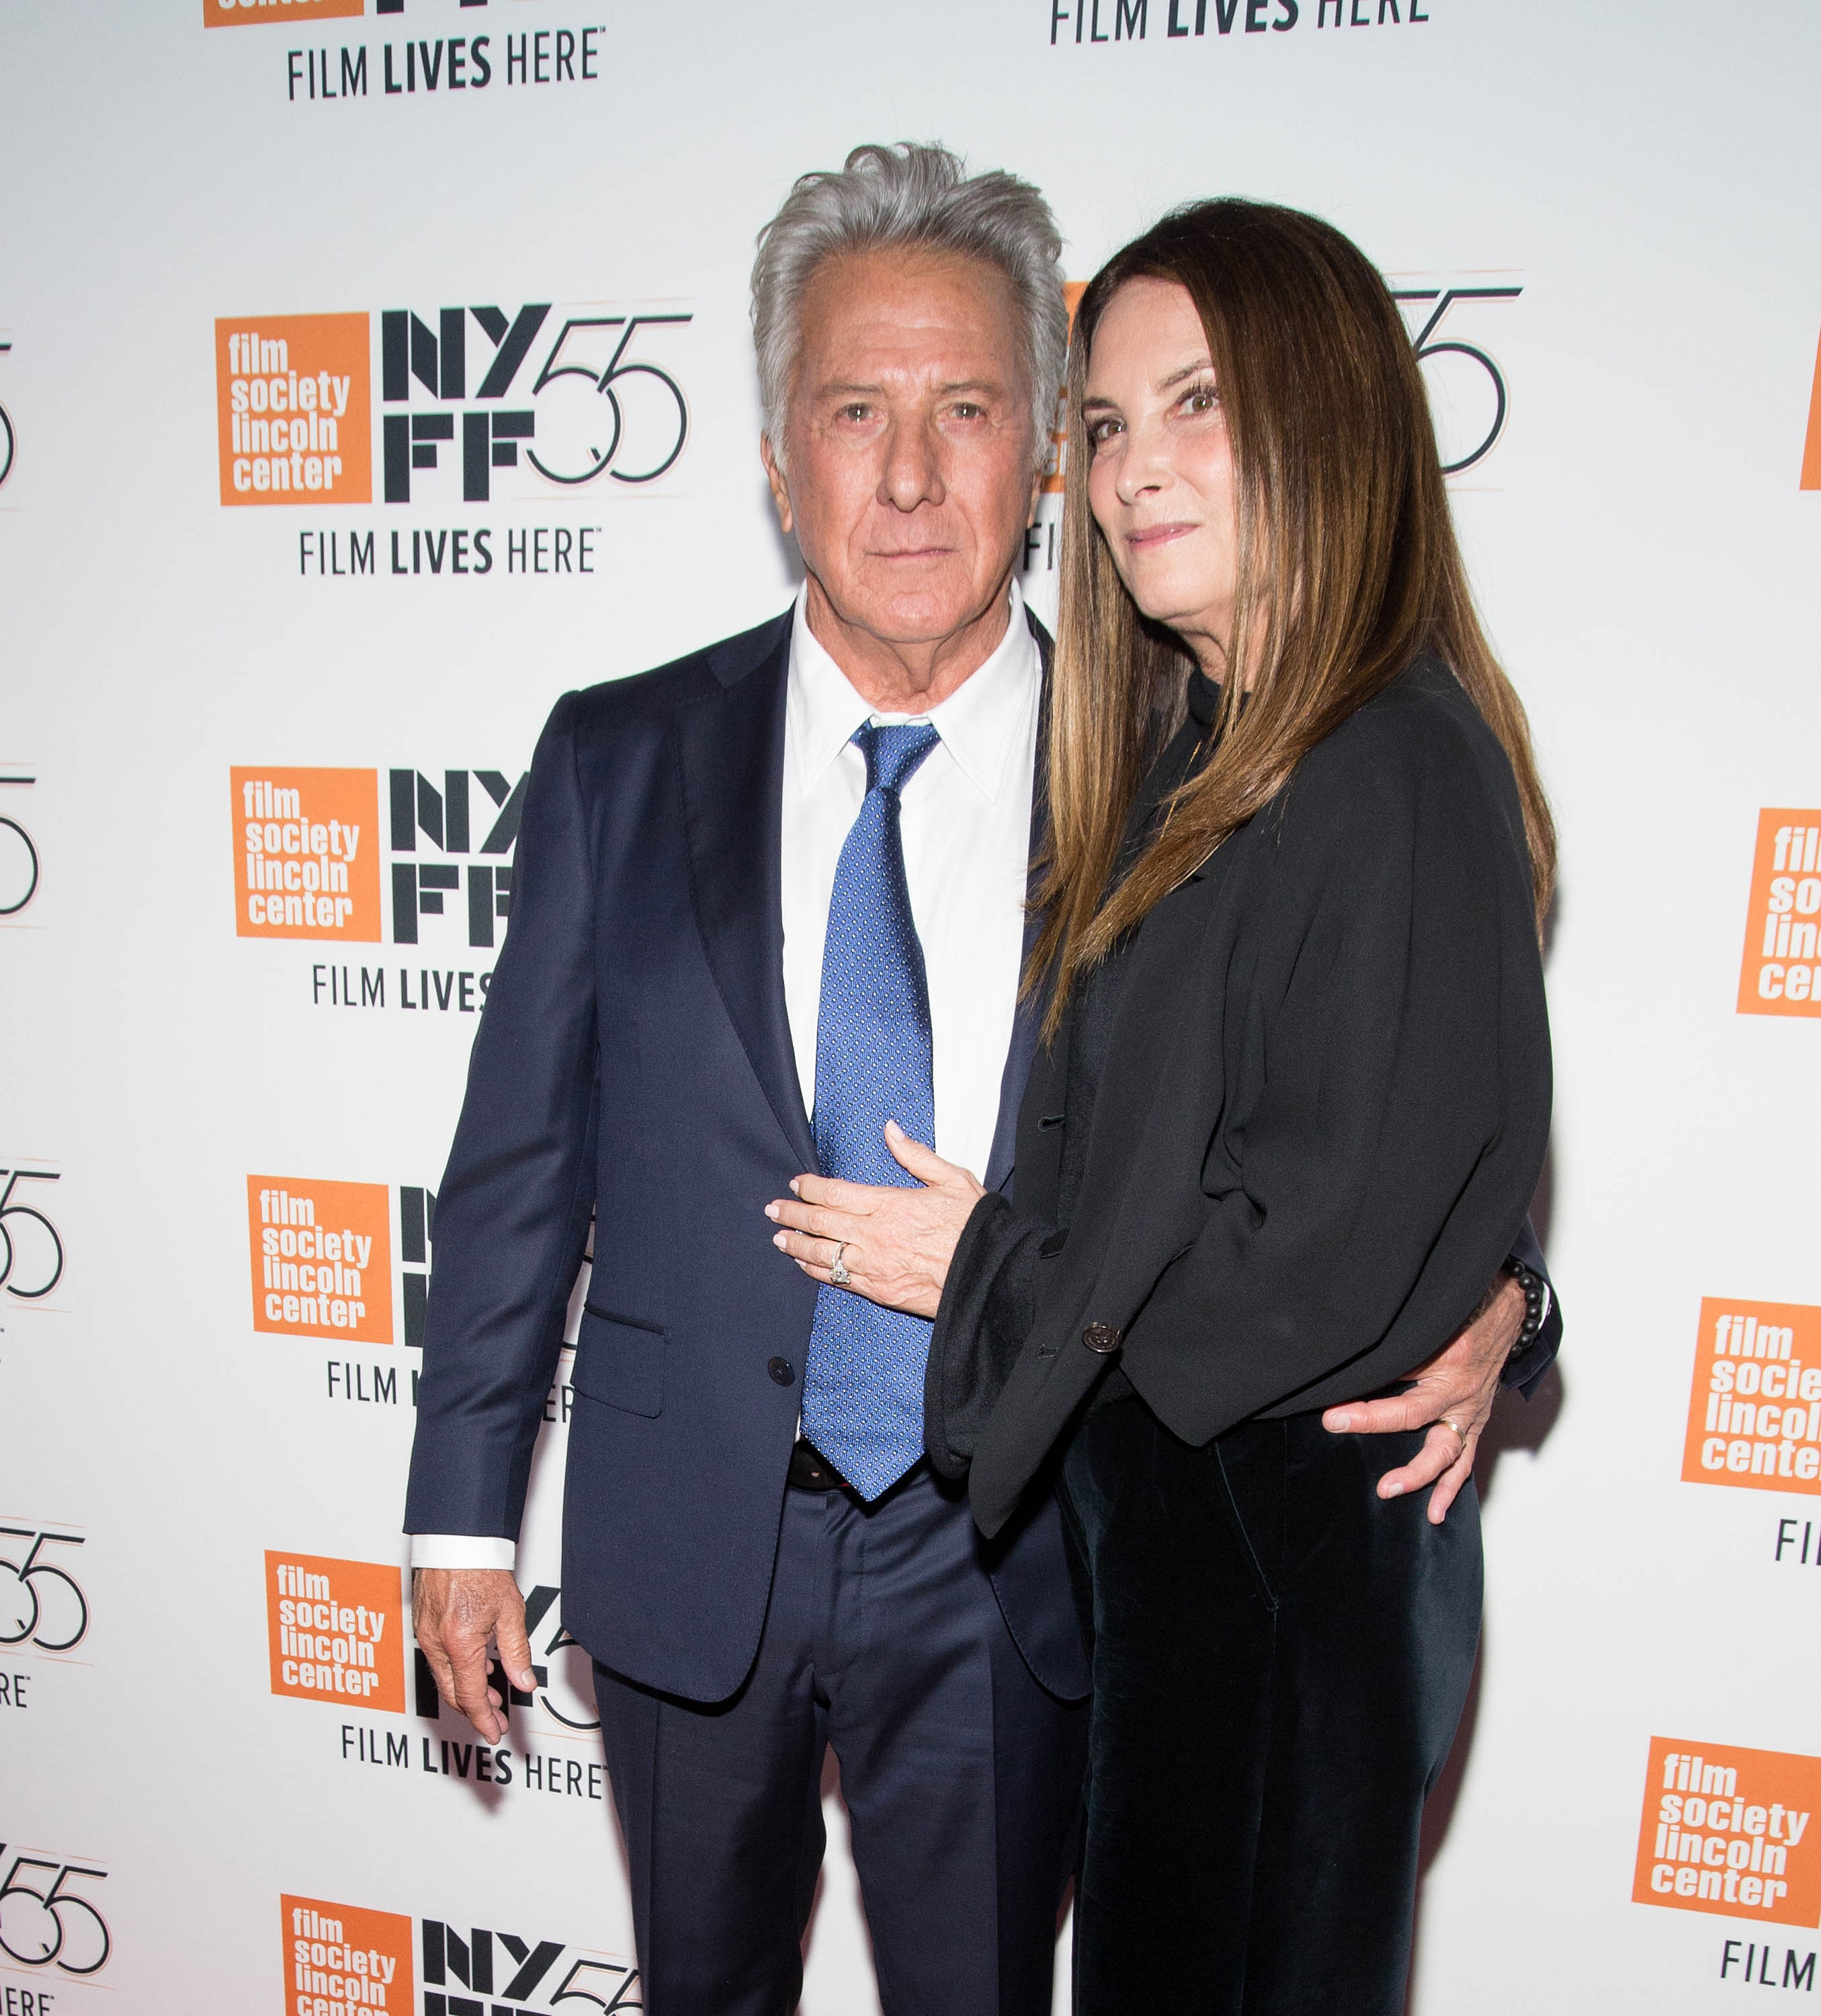 Dustin Hoffman and Lisa Hoffman at the 55th New York Film Festival screening of "Meyerowitz Stories" in New York City on October 1, 2017. | Source: Getty Images